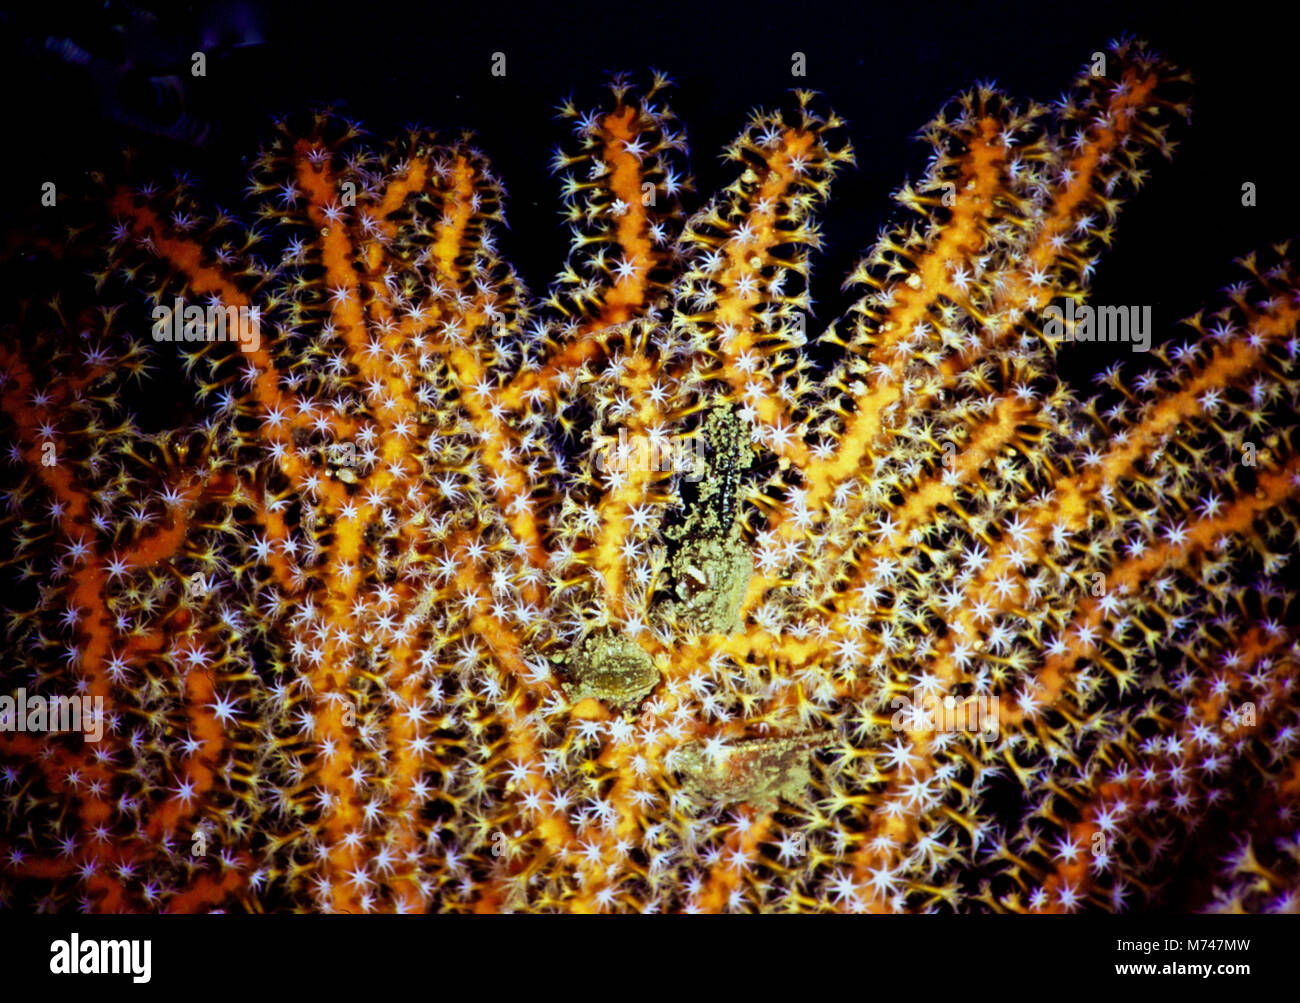 A gorgonian fan coral (Acabaria splendens), with its many eight-tentacled polyps extended to catch passing micro-plankton. These colonies of tiny delicate animals, living in their brightly coloured communal skeletons, serve to illustrate the fragility and beauty of tropical and sub-tropical coral reefs. Very sadly, such reefs are dying; over a quarter have been reduced to rubble during the last twenty years. This trend is continuing. They are the most vulnerable of our planet's ecosystems, as they have very limited capacities to adapt to rising temperatures and acidification. Egyptian Red Sea. Stock Photo